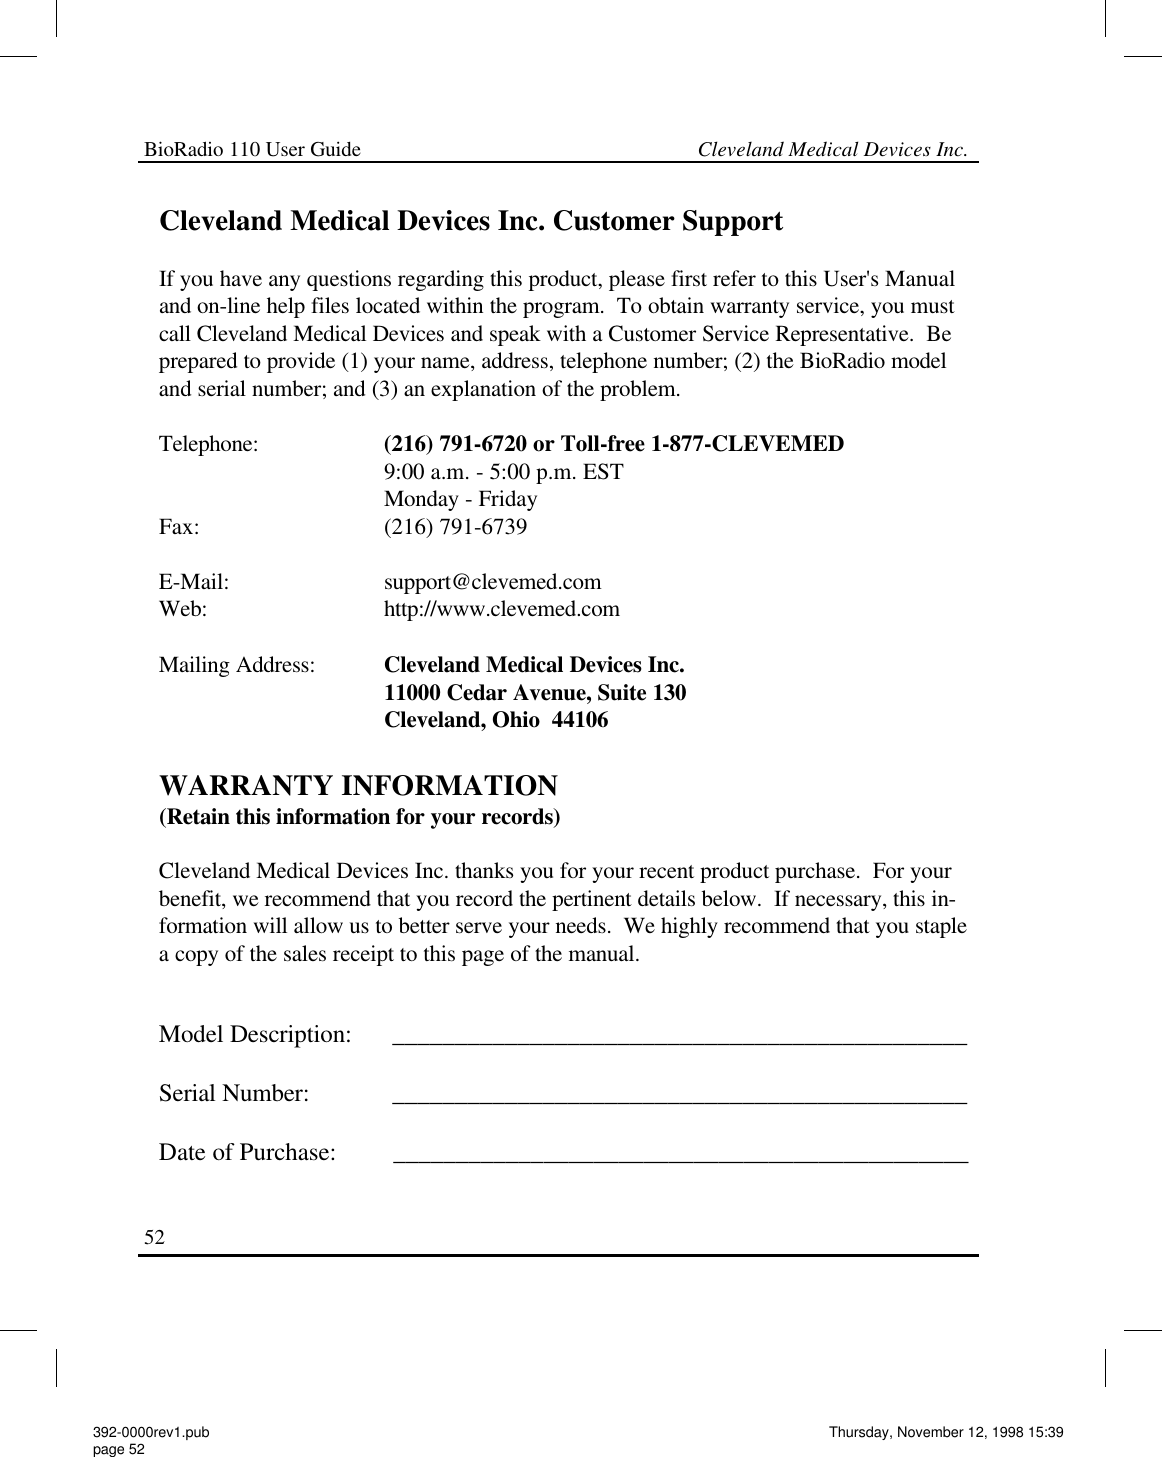 BioRadio 110 User Guide                                                             Cleveland Medical Devices Inc.52   Cleveland Medical Devices Inc. Customer Support  If you have any questions regarding this product, please first refer to this User&apos;s Manual and on-line help files located within the program.  To obtain warranty service, you must call Cleveland Medical Devices and speak with a Customer Service Representative.  Be prepared to provide (1) your name, address, telephone number; (2) the BioRadio model and serial number; and (3) an explanation of the problem.  Telephone:                     (216) 791-6720 or Toll-free 1-877-CLEVEMED                                       9:00 a.m. - 5:00 p.m. EST                                       Monday - Friday Fax:                               (216) 791-6739  E-Mail:                          support@clevemed.com Web:                              http://www.clevemed.com  Mailing Address:            Cleveland Medical Devices Inc.                                       11000 Cedar Avenue, Suite 130                                       Cleveland, Ohio  44106  WARRANTY INFORMATION (Retain this information for your records)  Cleveland Medical Devices Inc. thanks you for your recent product purchase.  For your benefit, we recommend that you record the pertinent details below.  If necessary, this in-formation will allow us to better serve your needs.  We highly recommend that you staple a copy of the sales receipt to this page of the manual.   Model Description:      ______________________________________________  Serial Number:             ______________________________________________  Date of Purchase:         ______________________________________________  392-0000rev1.pub page 52 Thursday, November 12, 1998 15:39 